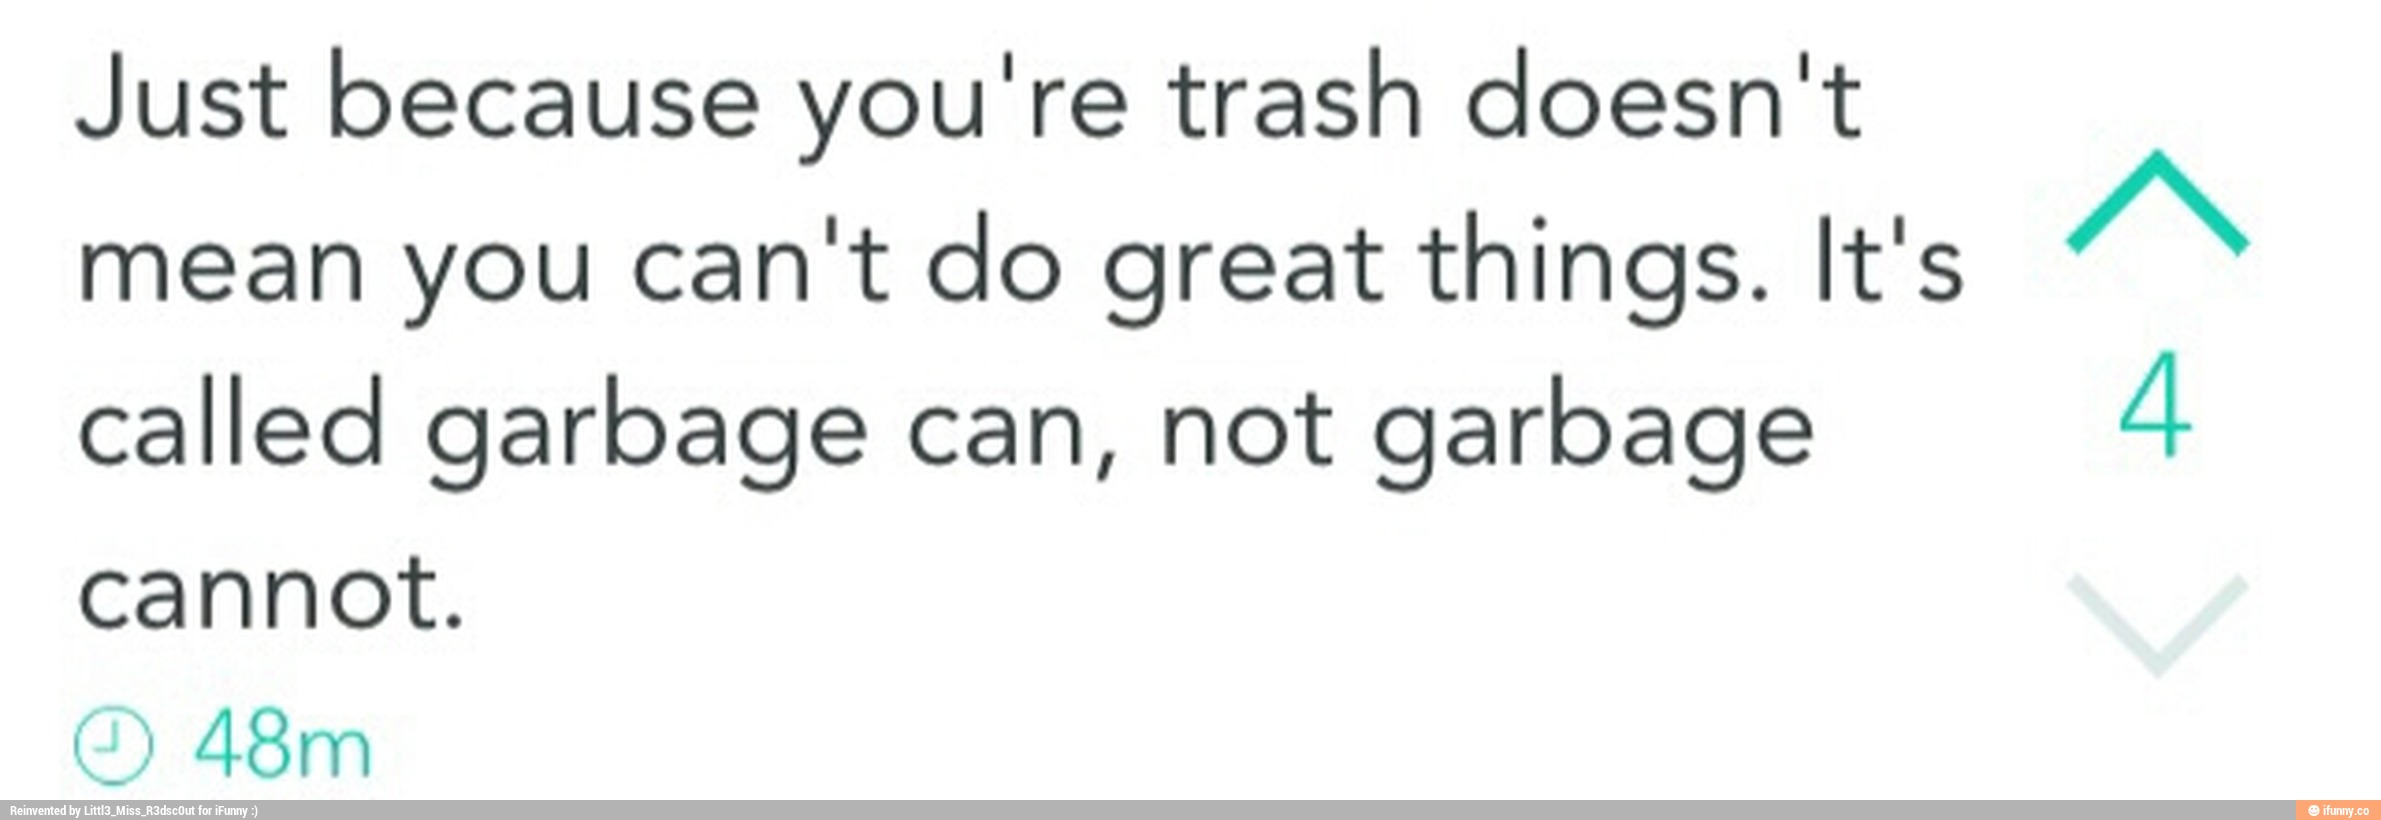 Just because you're trash doesn't mean you can't do great th...